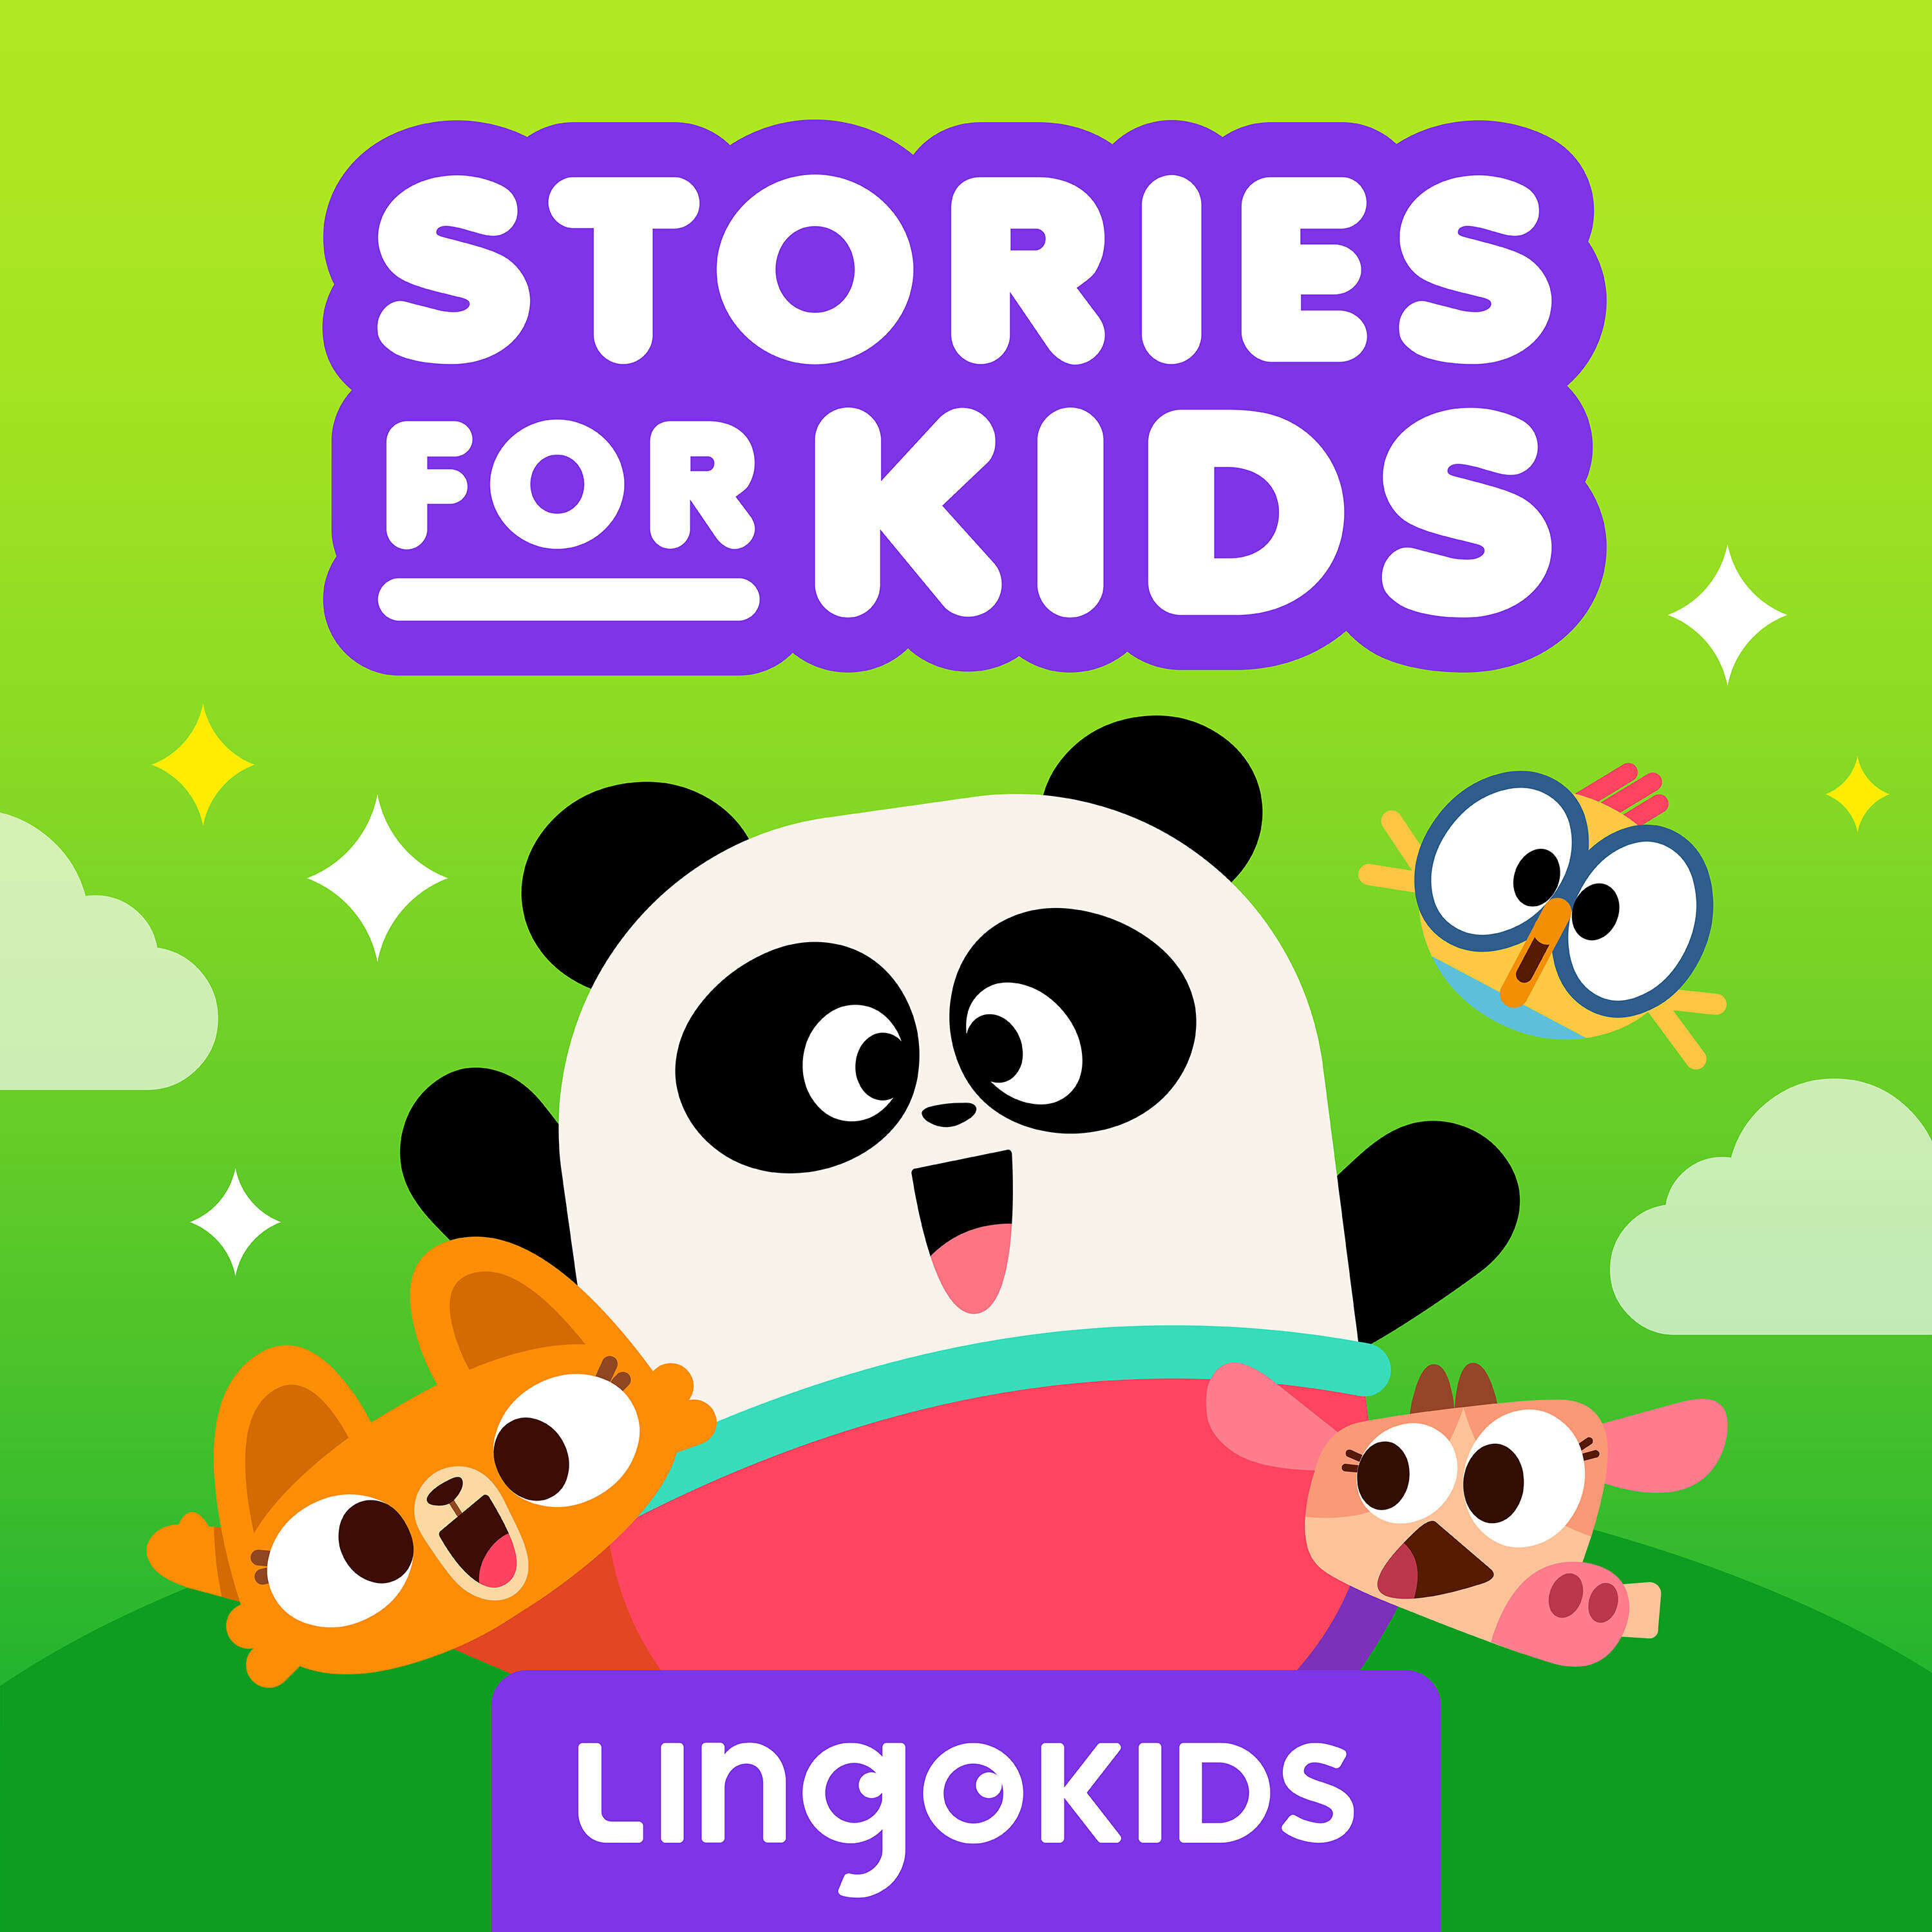 Lingokids: Stories for Kids —Learn life lessons and laugh!:Lingokids